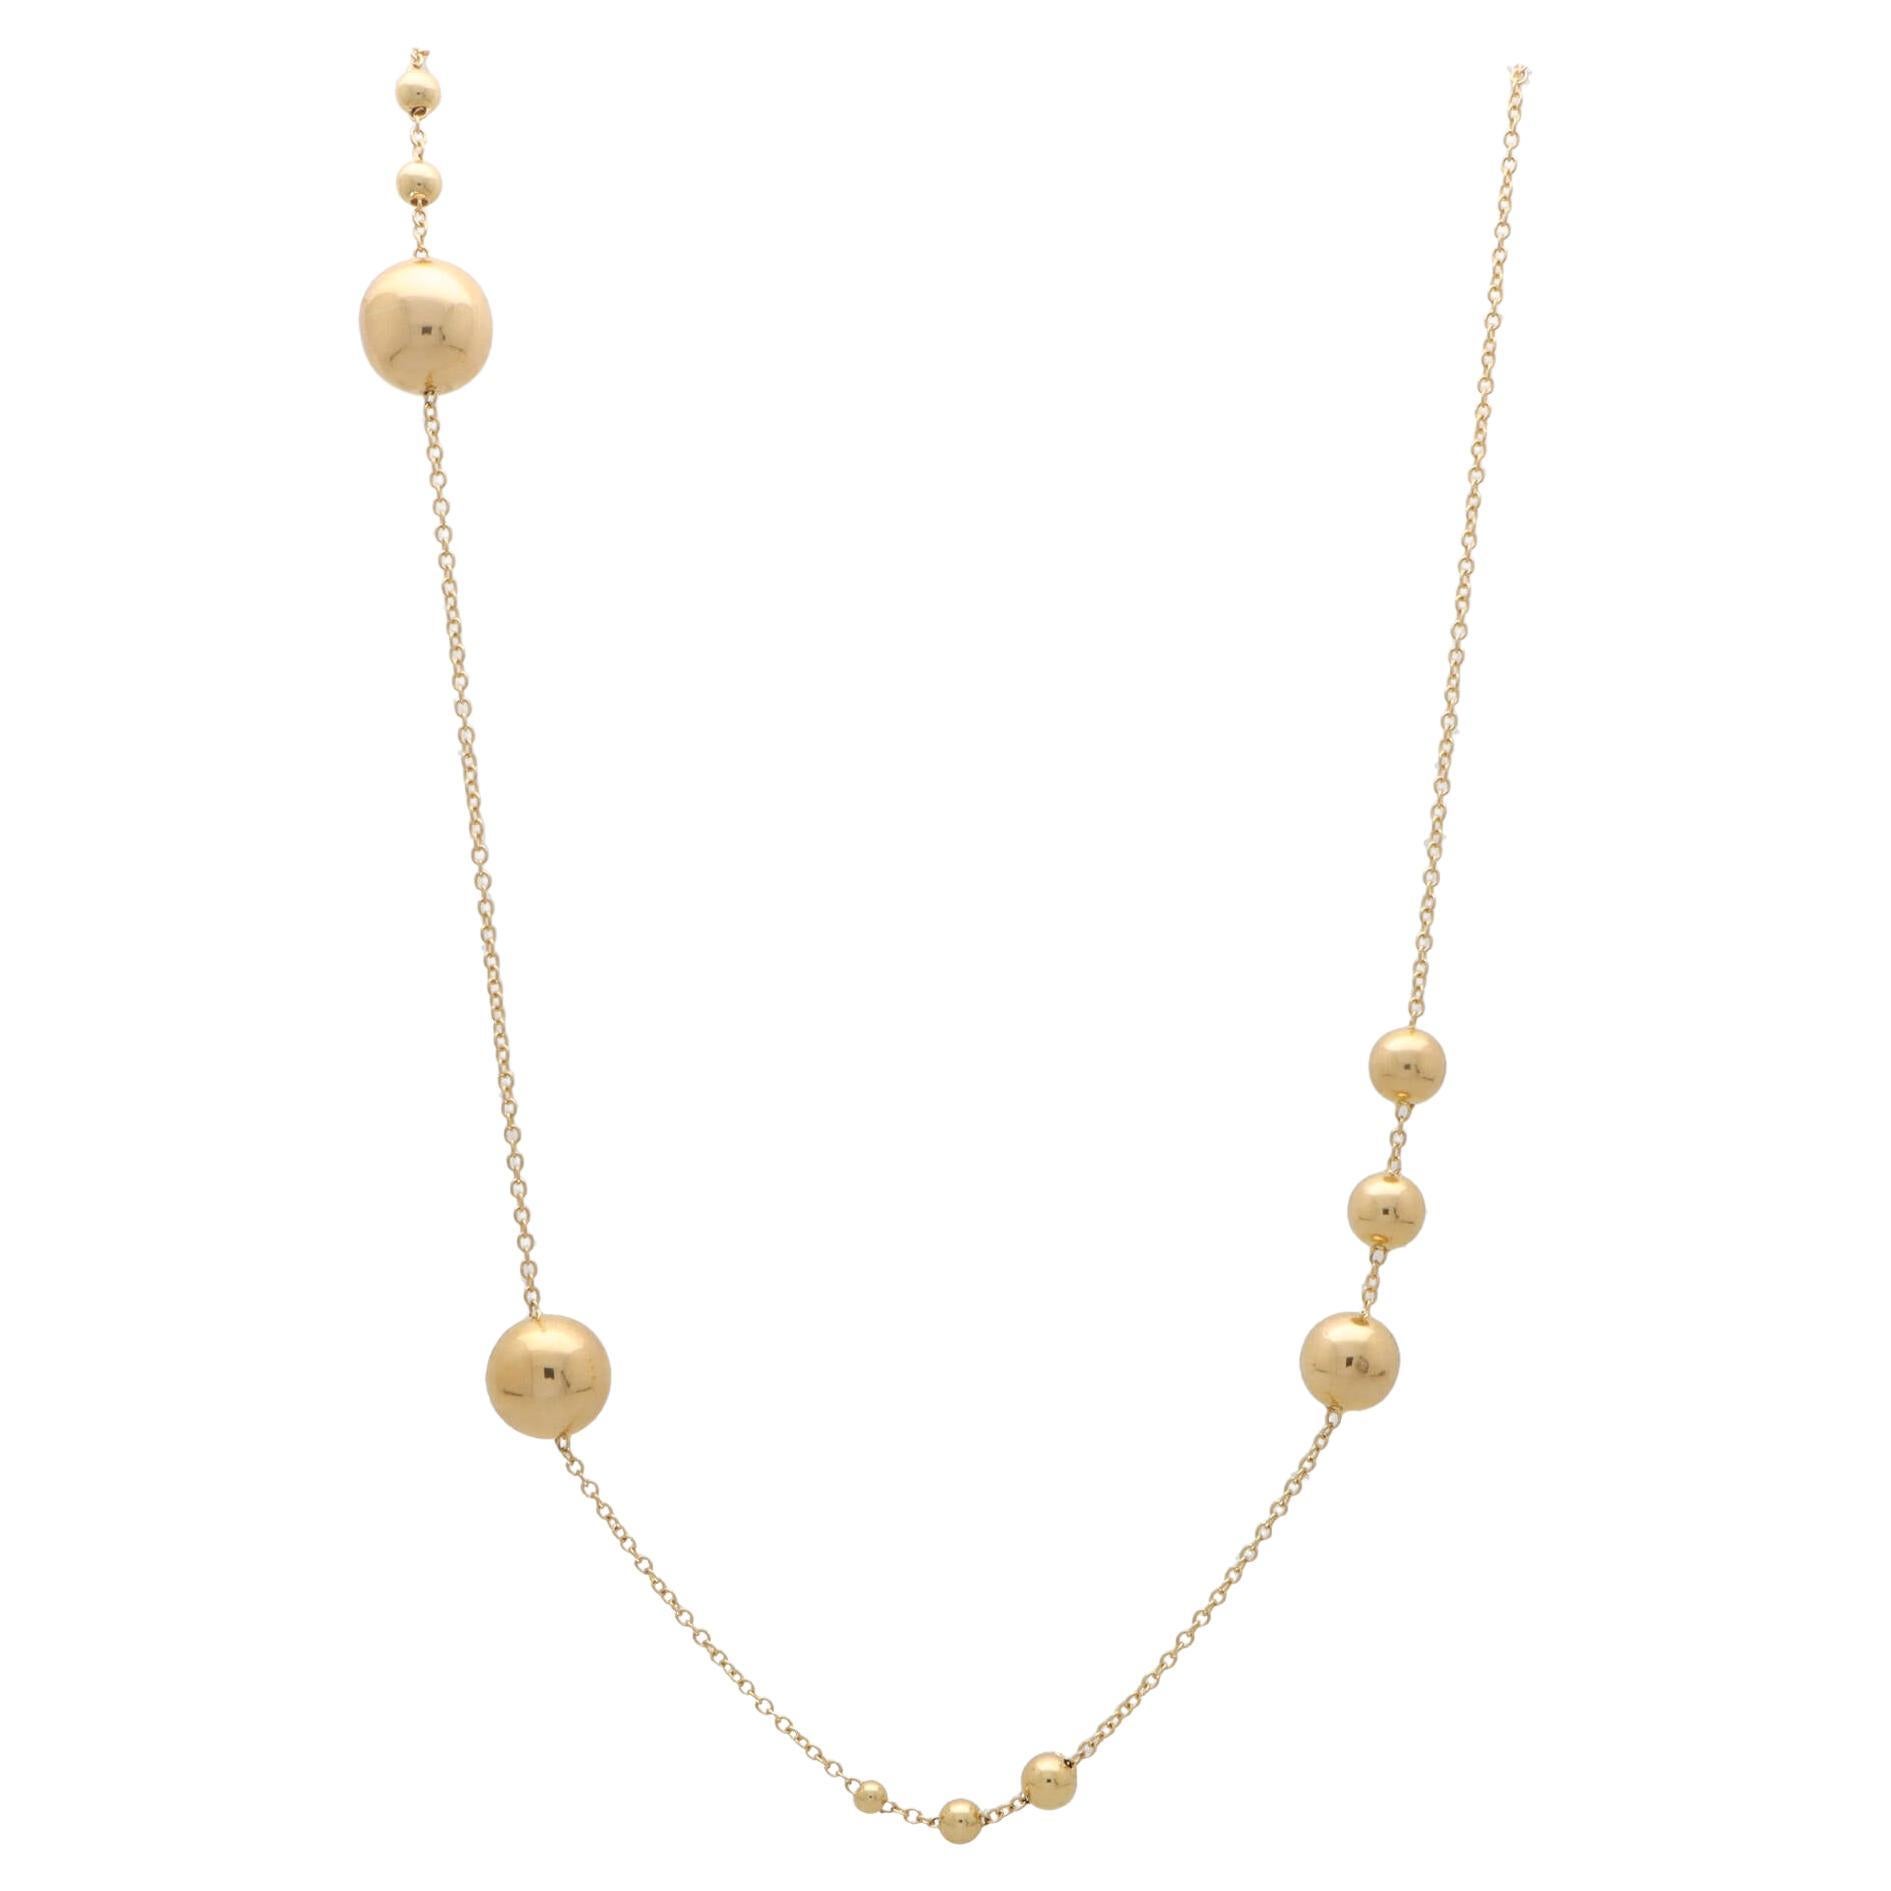 Contemporary Golden Ball 34-inch Chain Necklace Set in 18k Yellow Gold